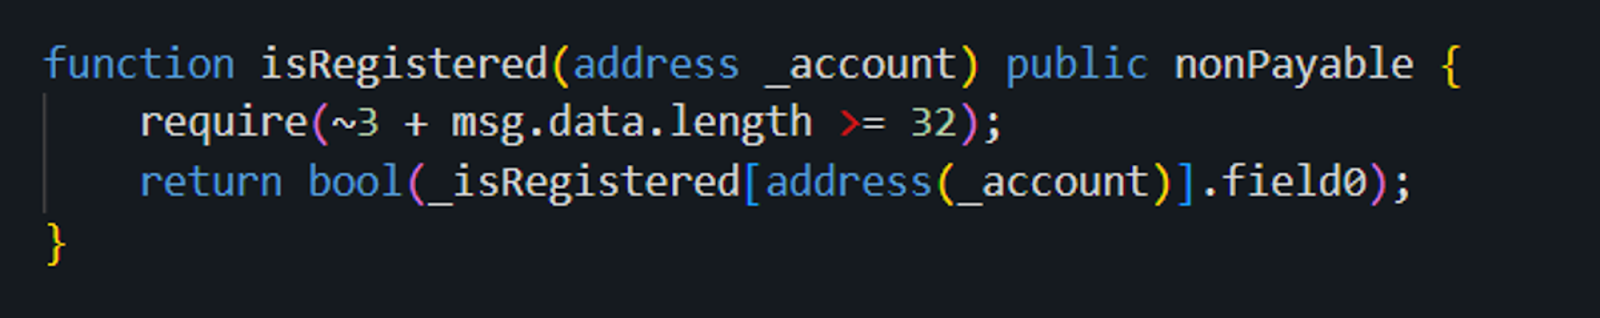 Solidity Function to Check Account Registration